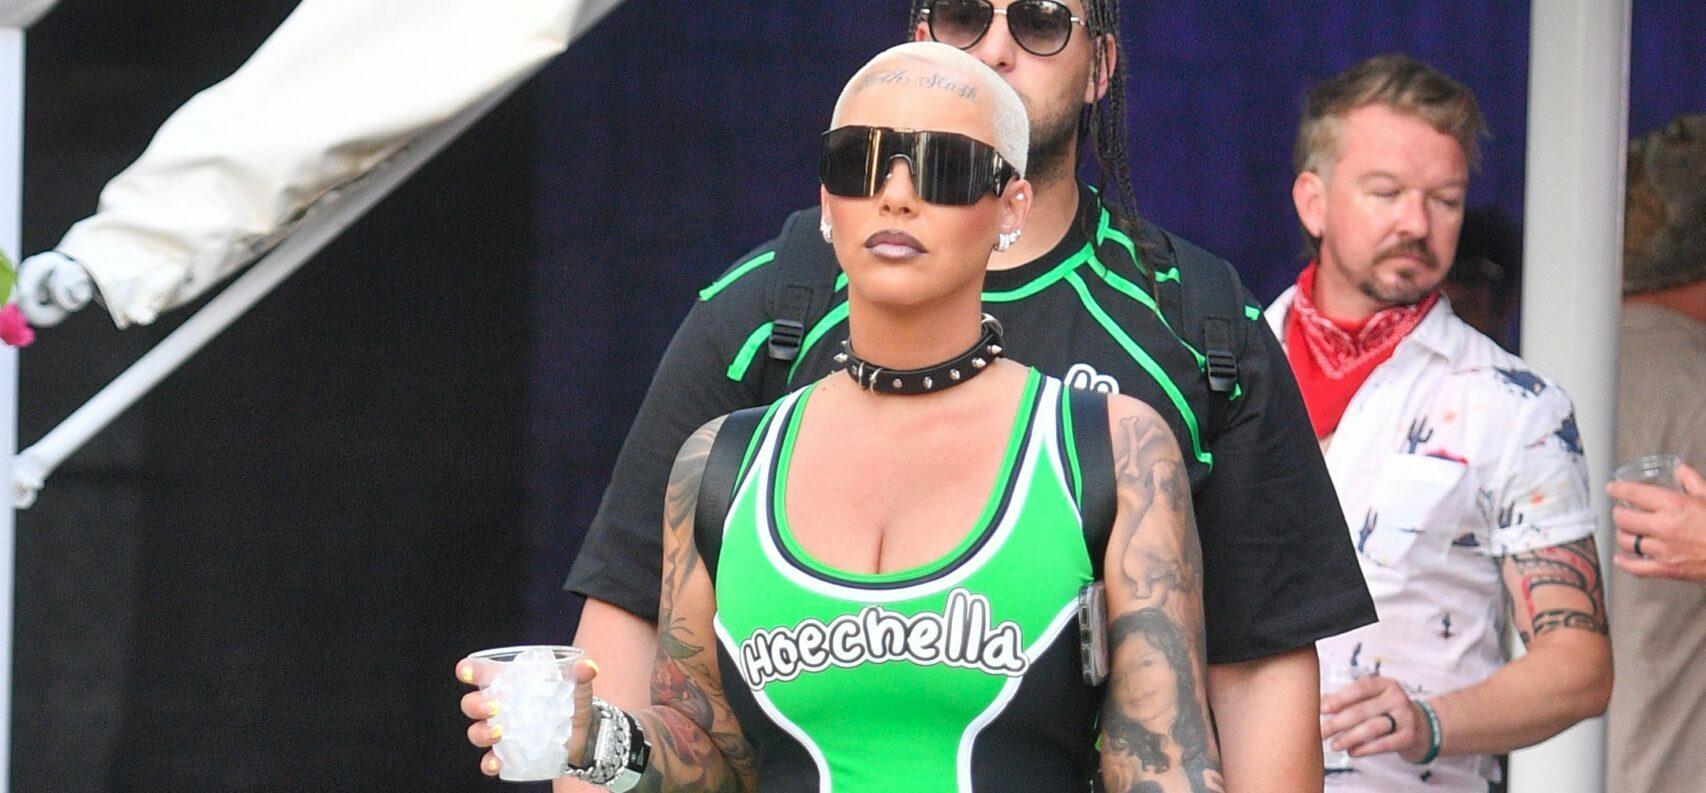 Amber Rose wears a apos Hoechella apos outfit to Coachella day 2